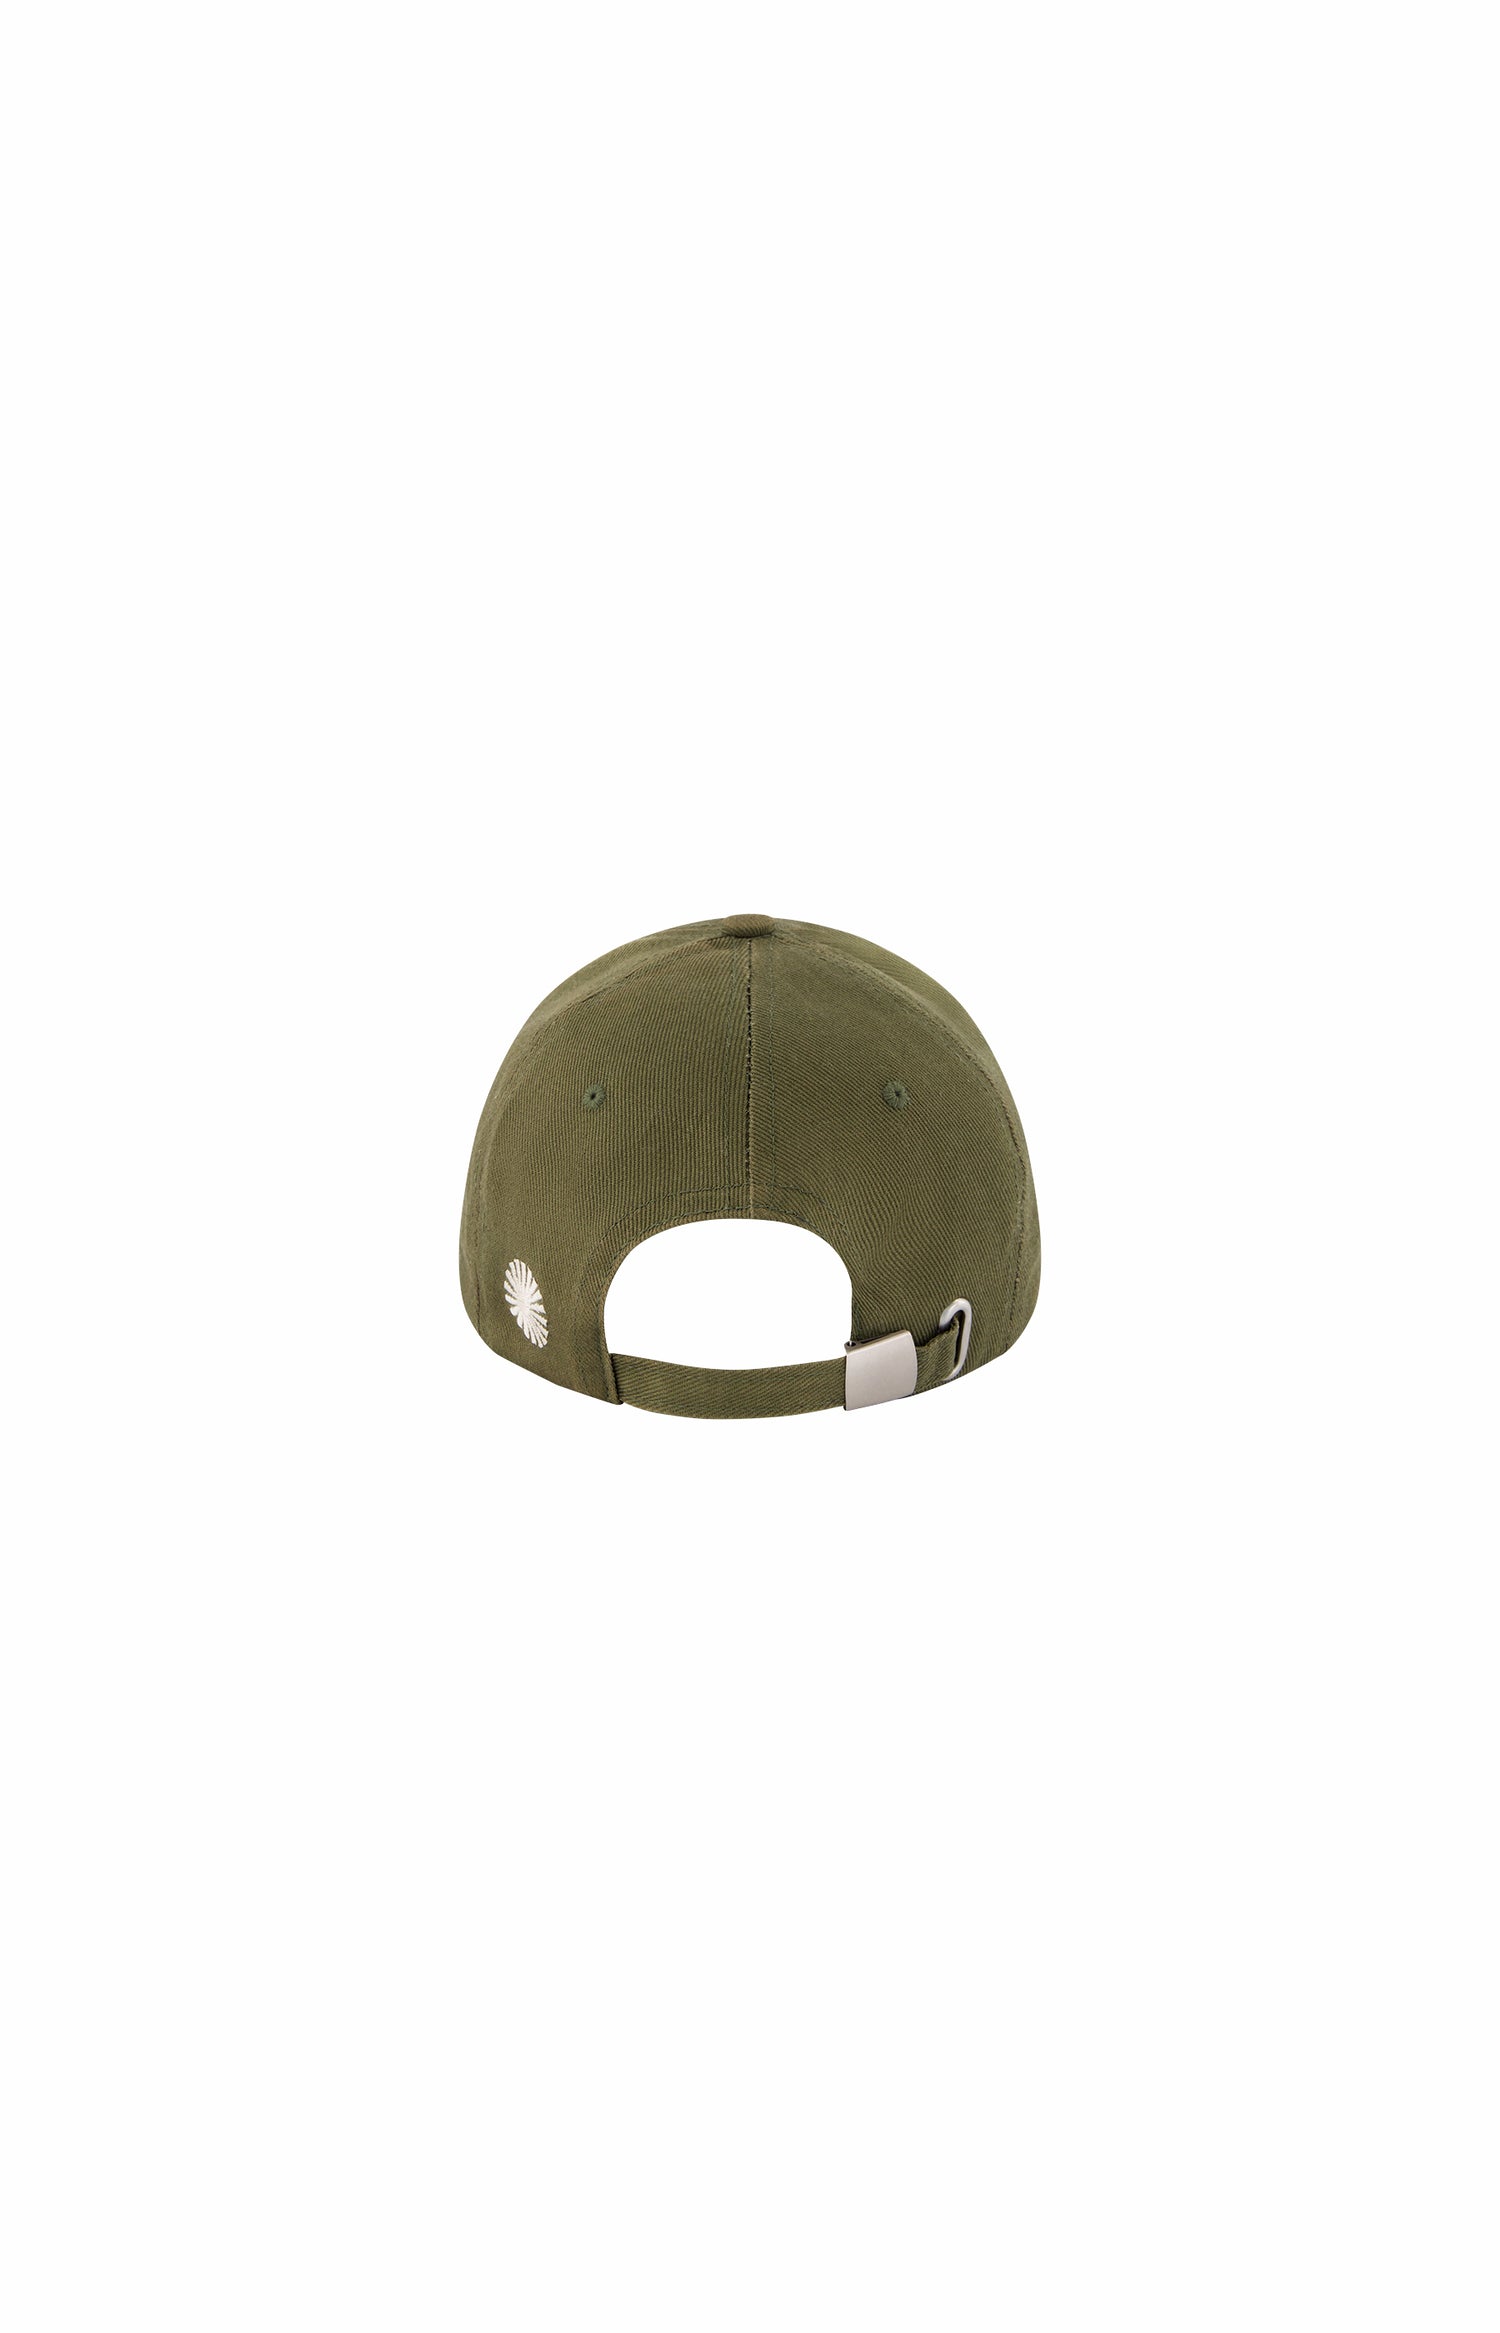 back view of khaki hat with metal buckle and logo